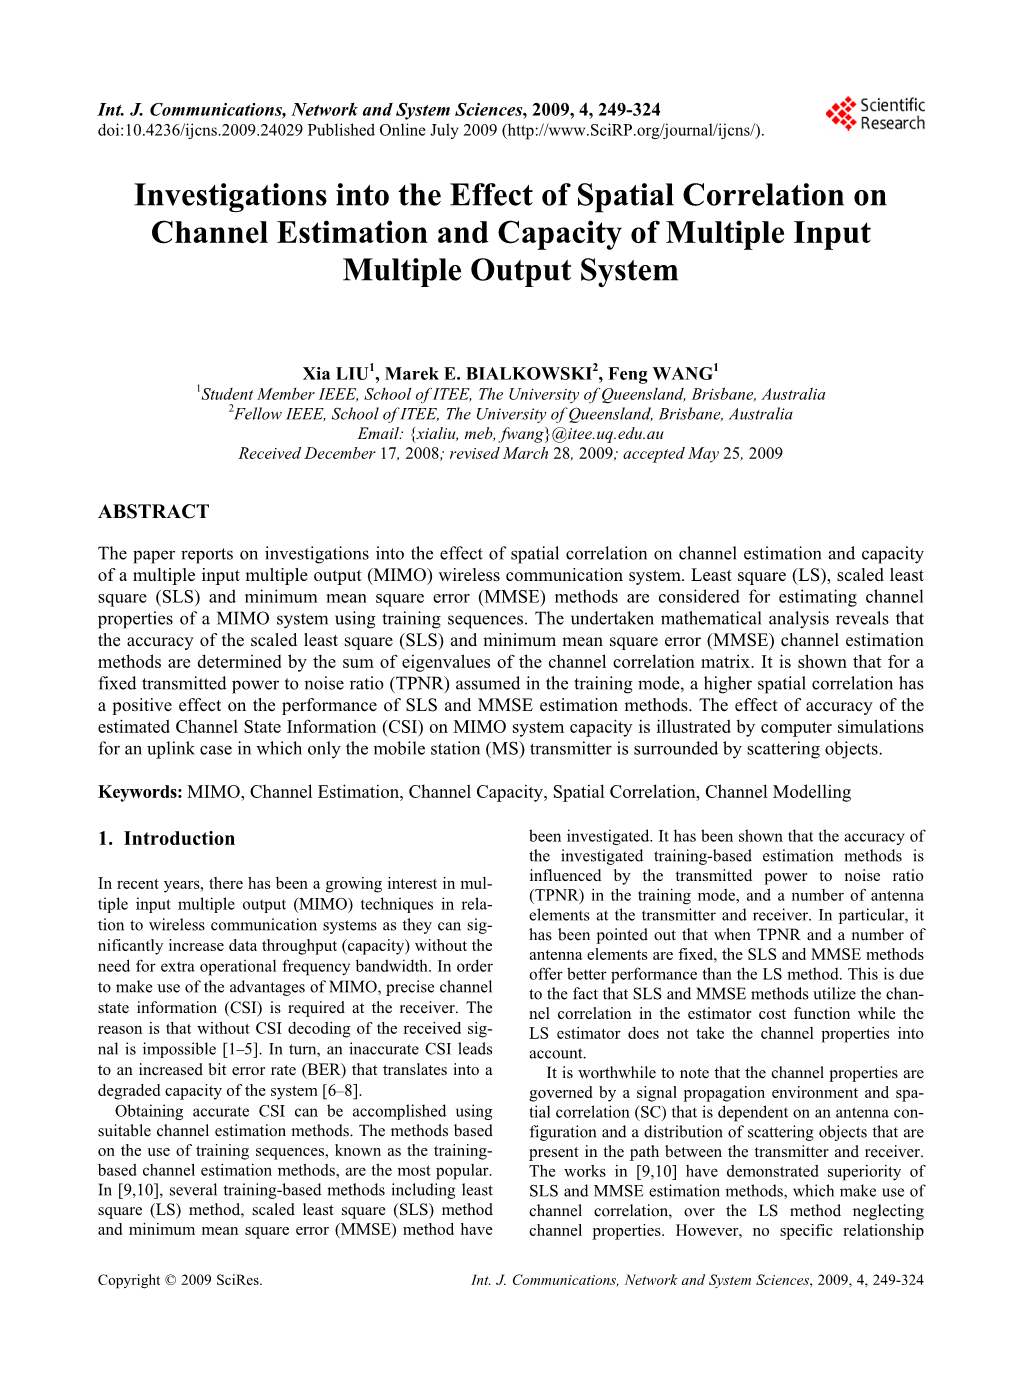 Investigations Into the Effect of Spatial Correlation on Channel Estimation and Capacity of Multiple Input Multiple Output System